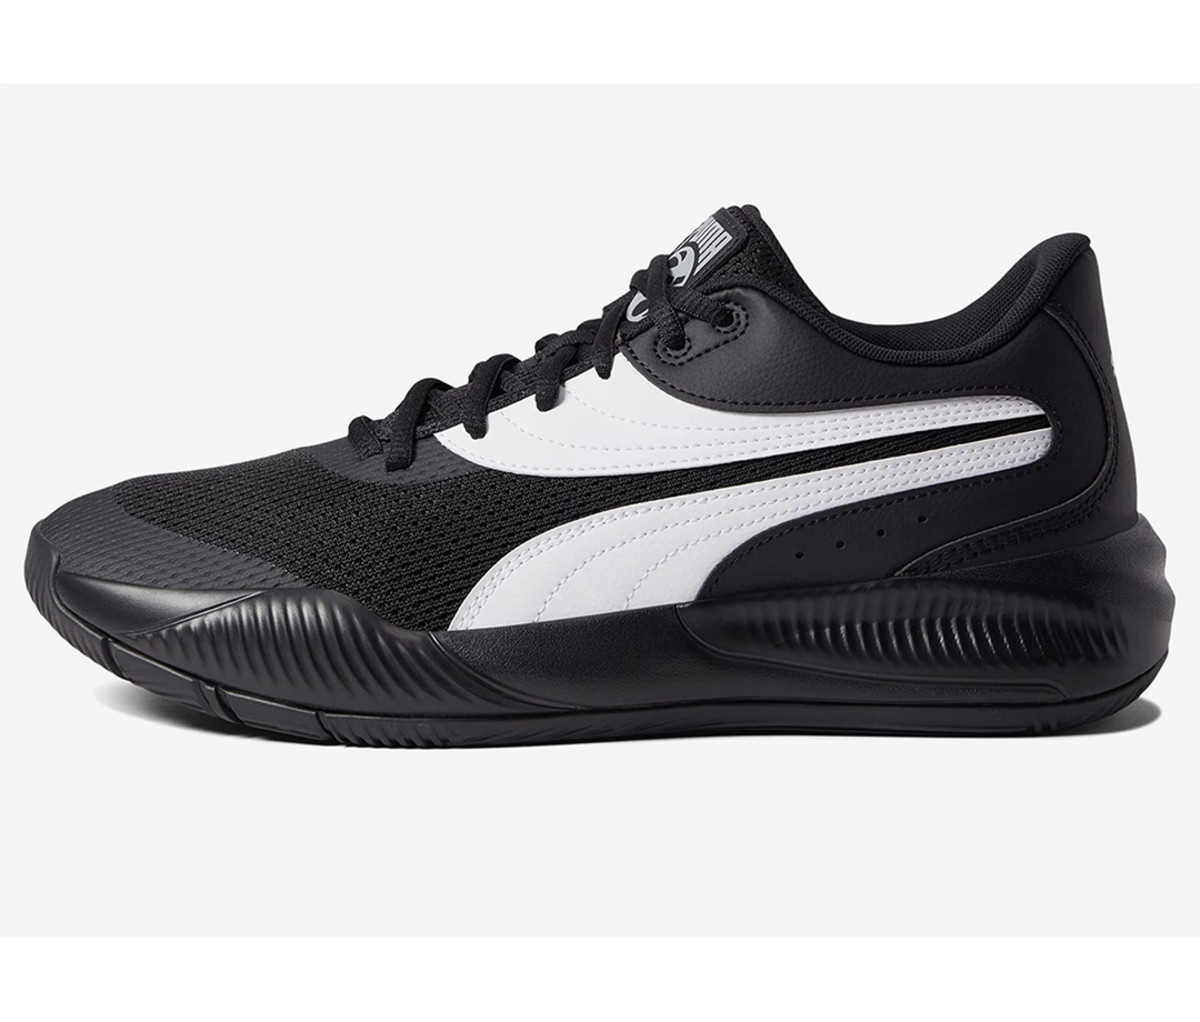 getrouwd Wissen calorie Hit the Court in Style With These PUMA Triple Basketball Shoes - Men's  Journal